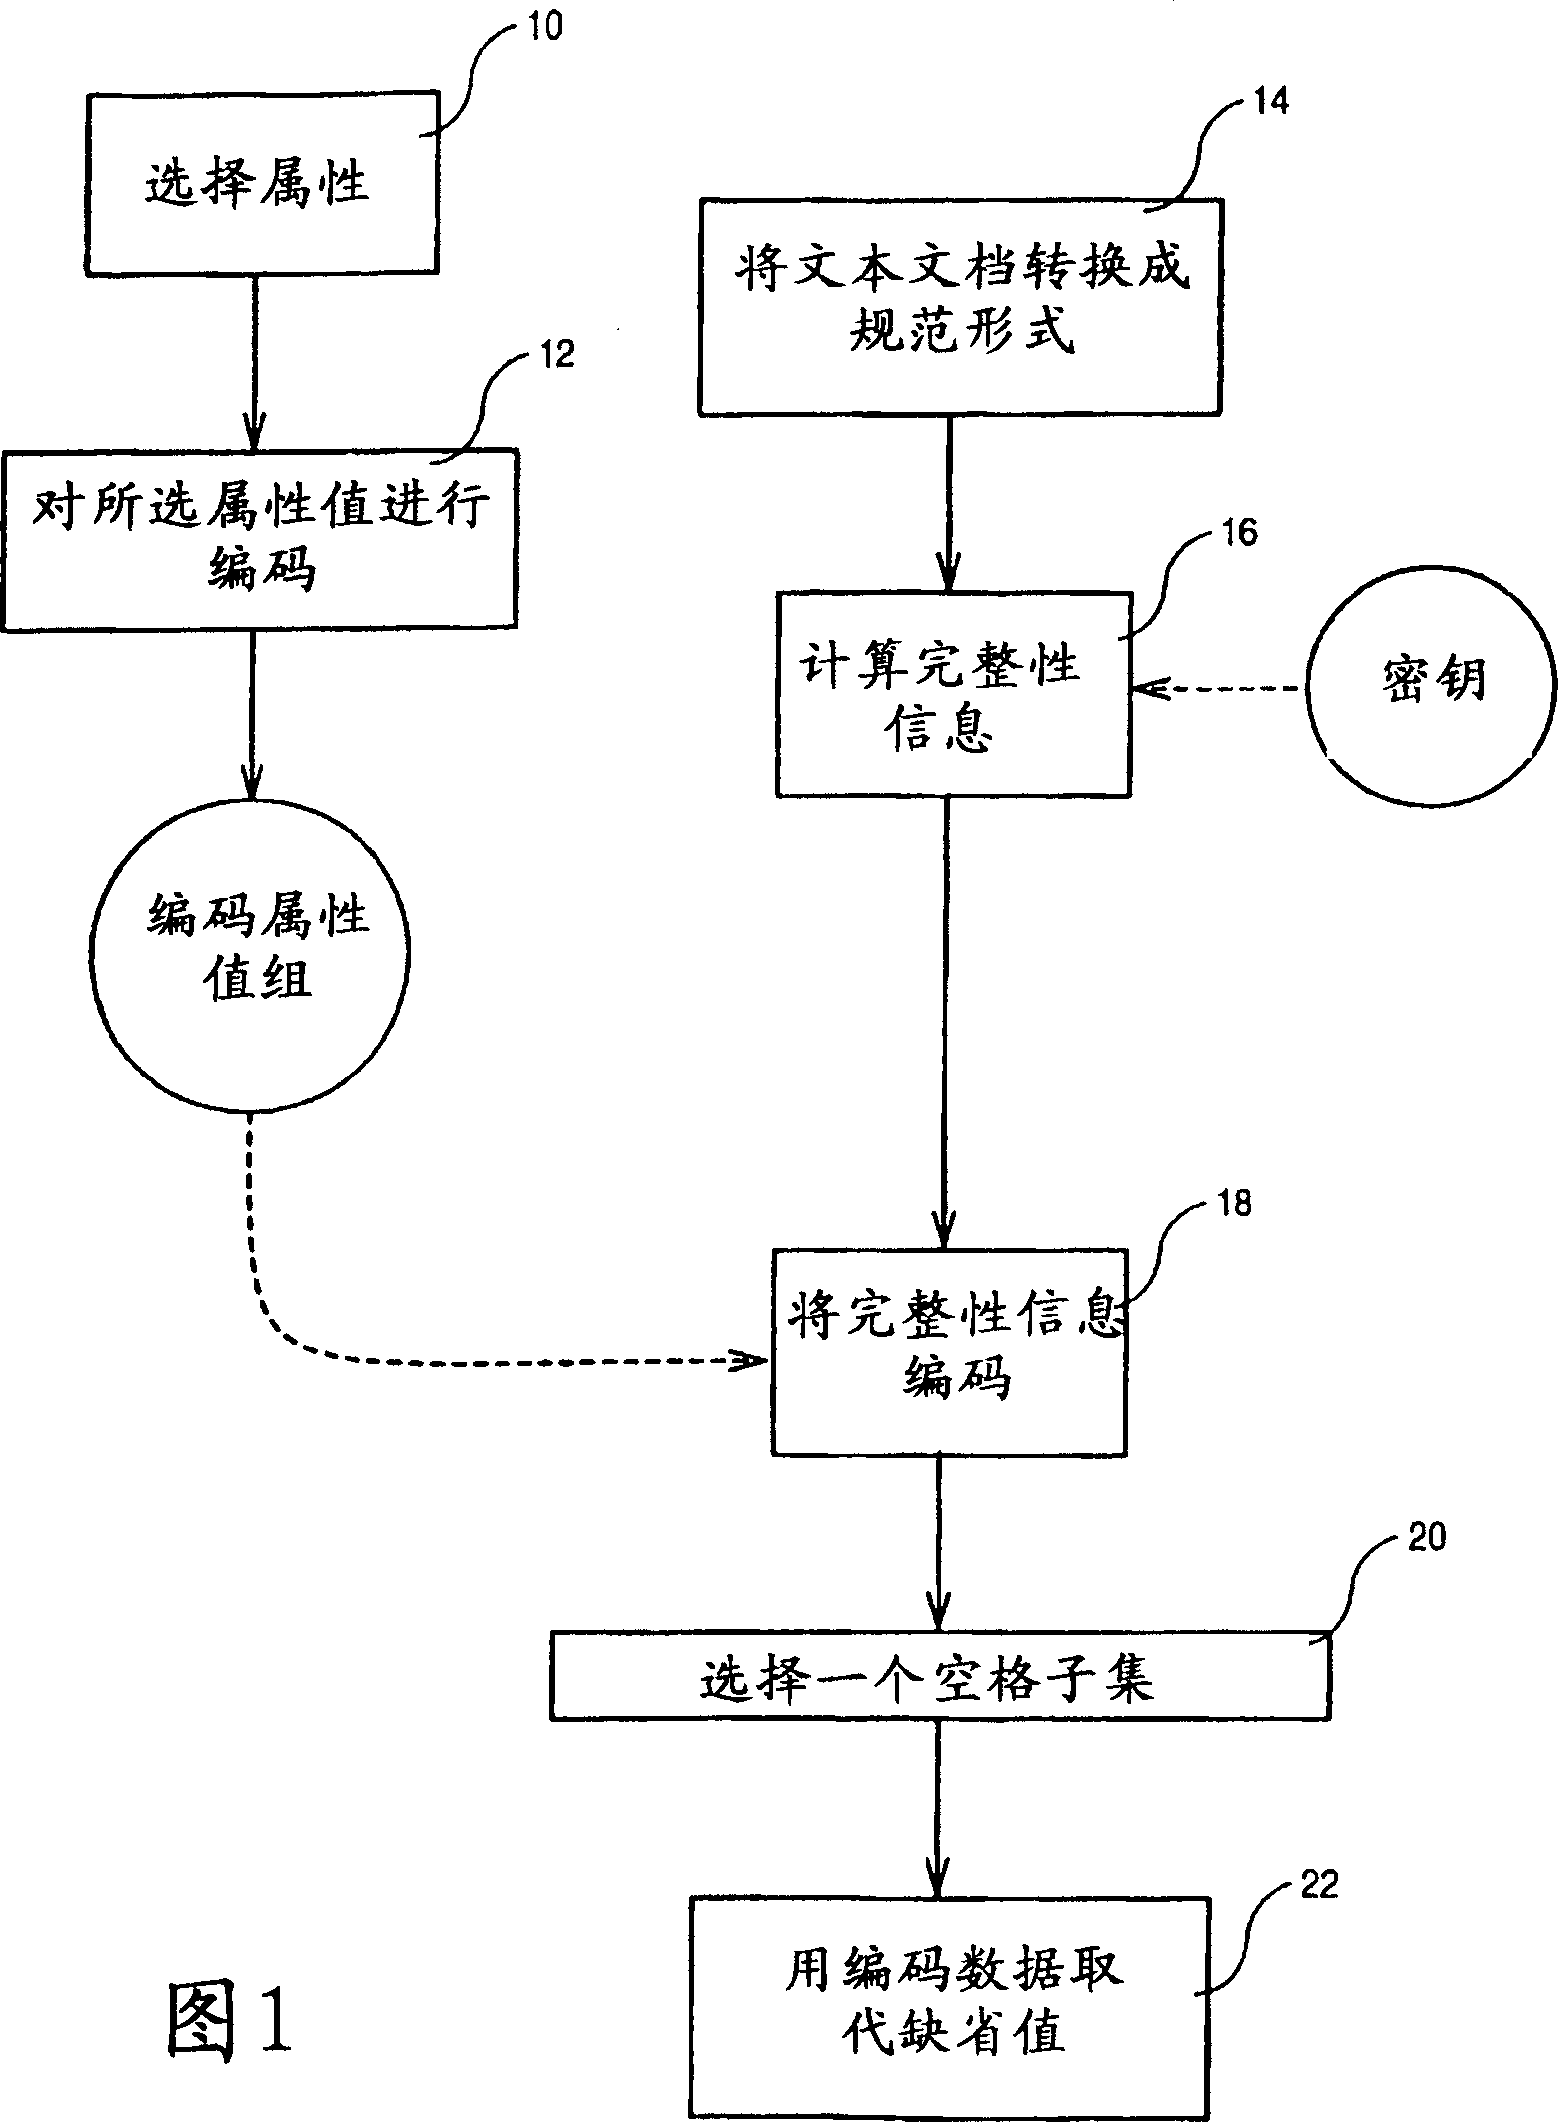 Method of invisibly embedding and hiding data into soft-copy text documents